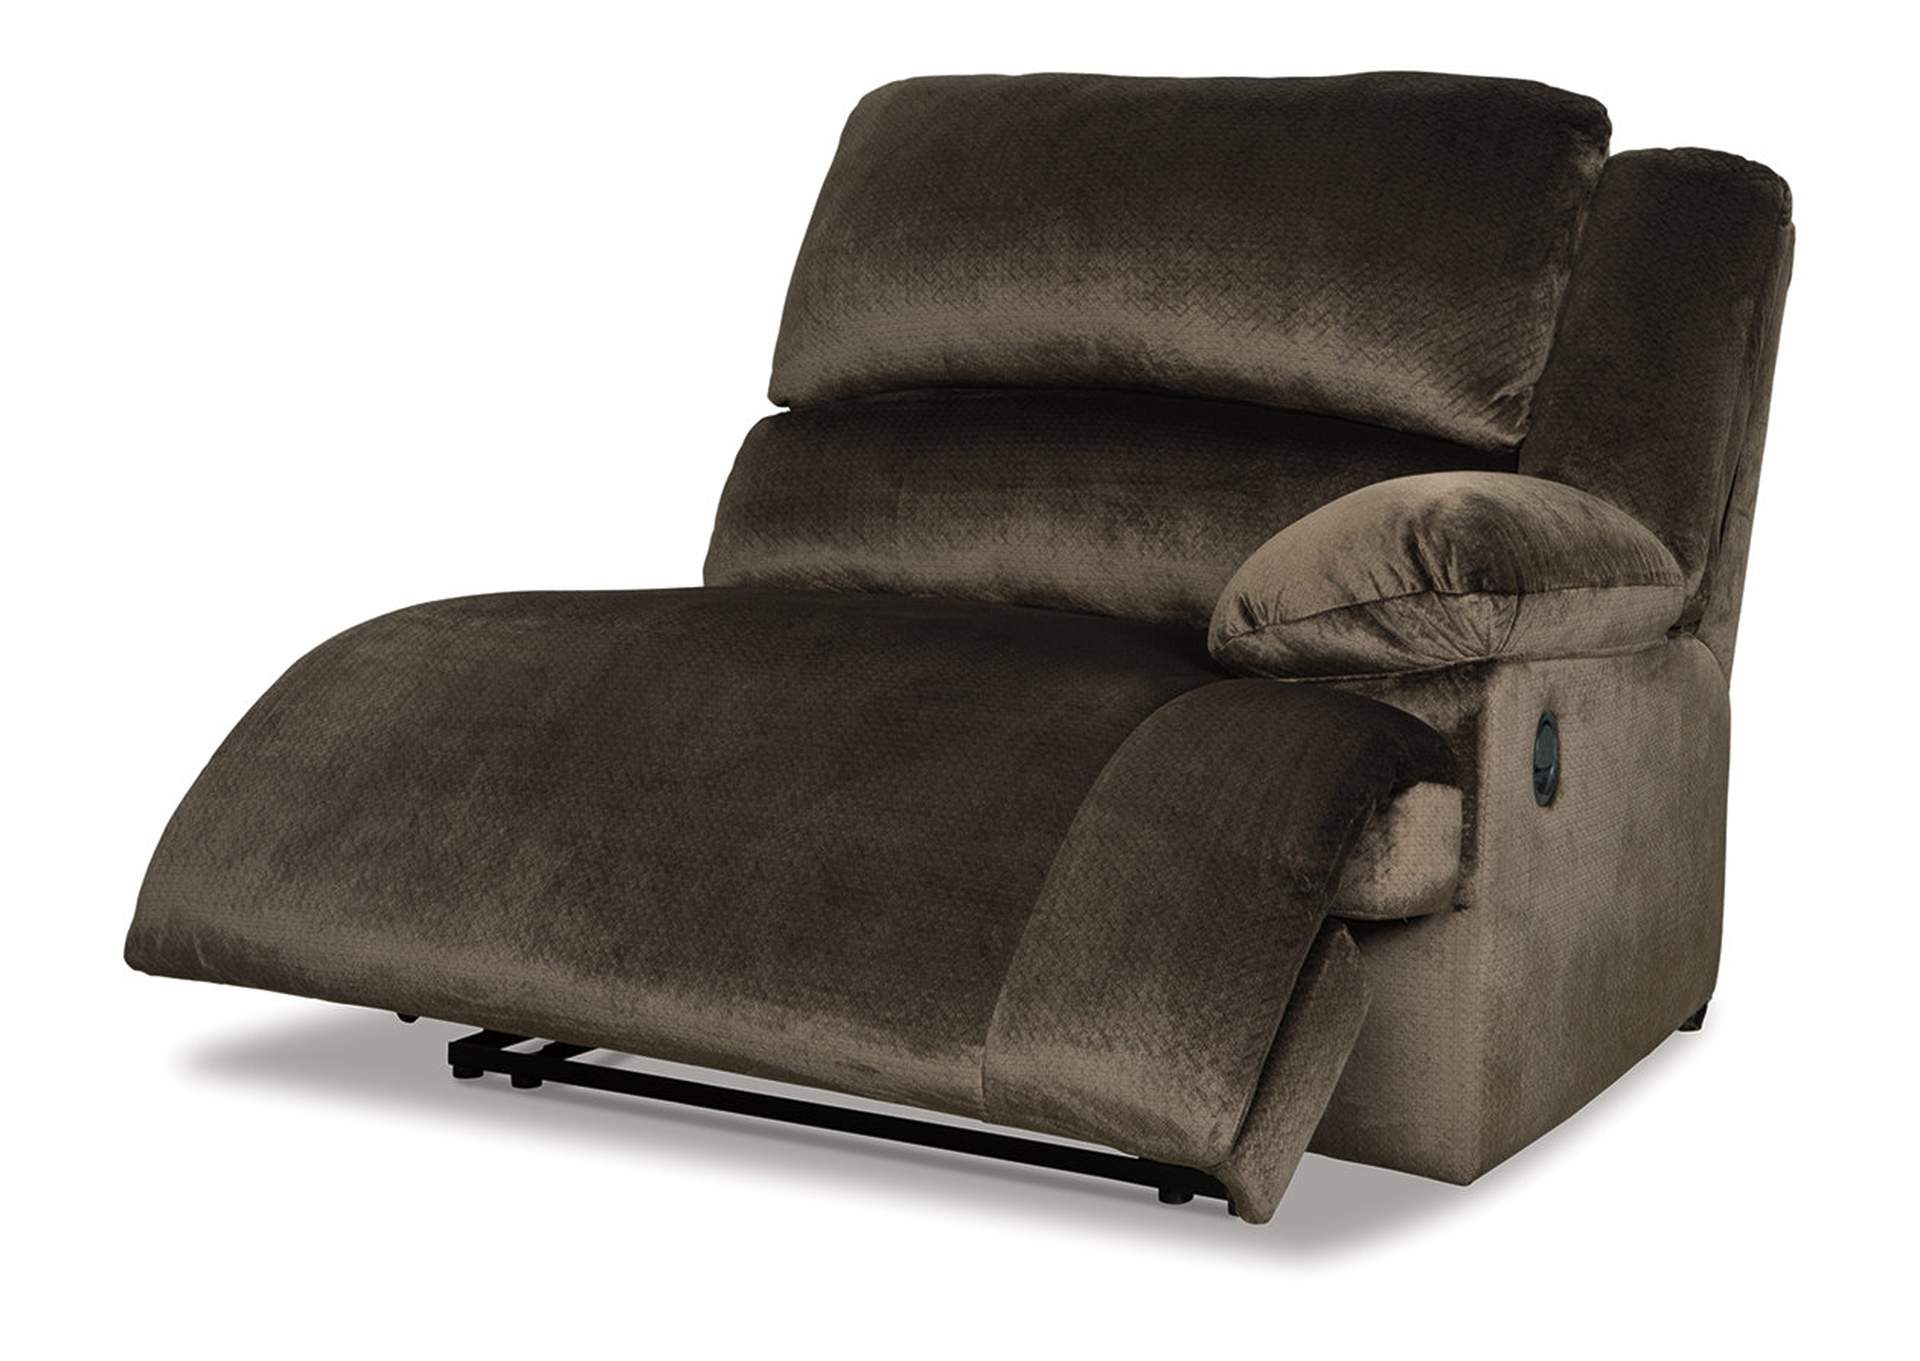 Clonmel Right-Arm Facing Recliner,Signature Design By Ashley